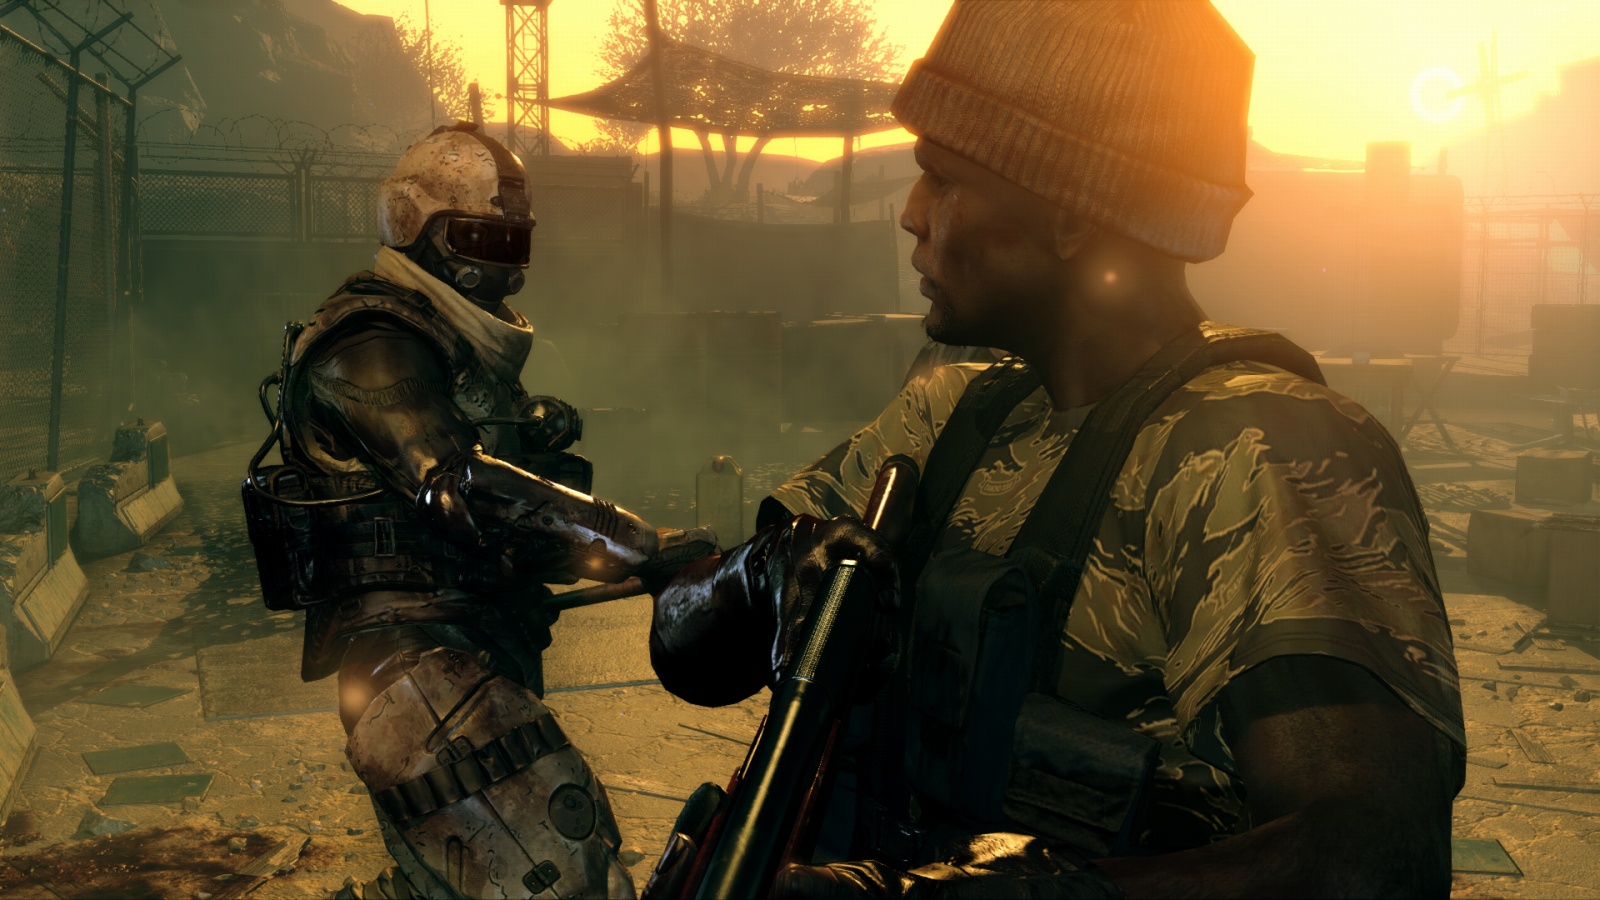 Media asset in full size related to 3dfxzone.it news item entitled as follows: Konami mostra una demo del gameplay del game Metal Gear Survive | Image Name: news24952_Metal-Gear-Survive_Screenshot_6.jpg